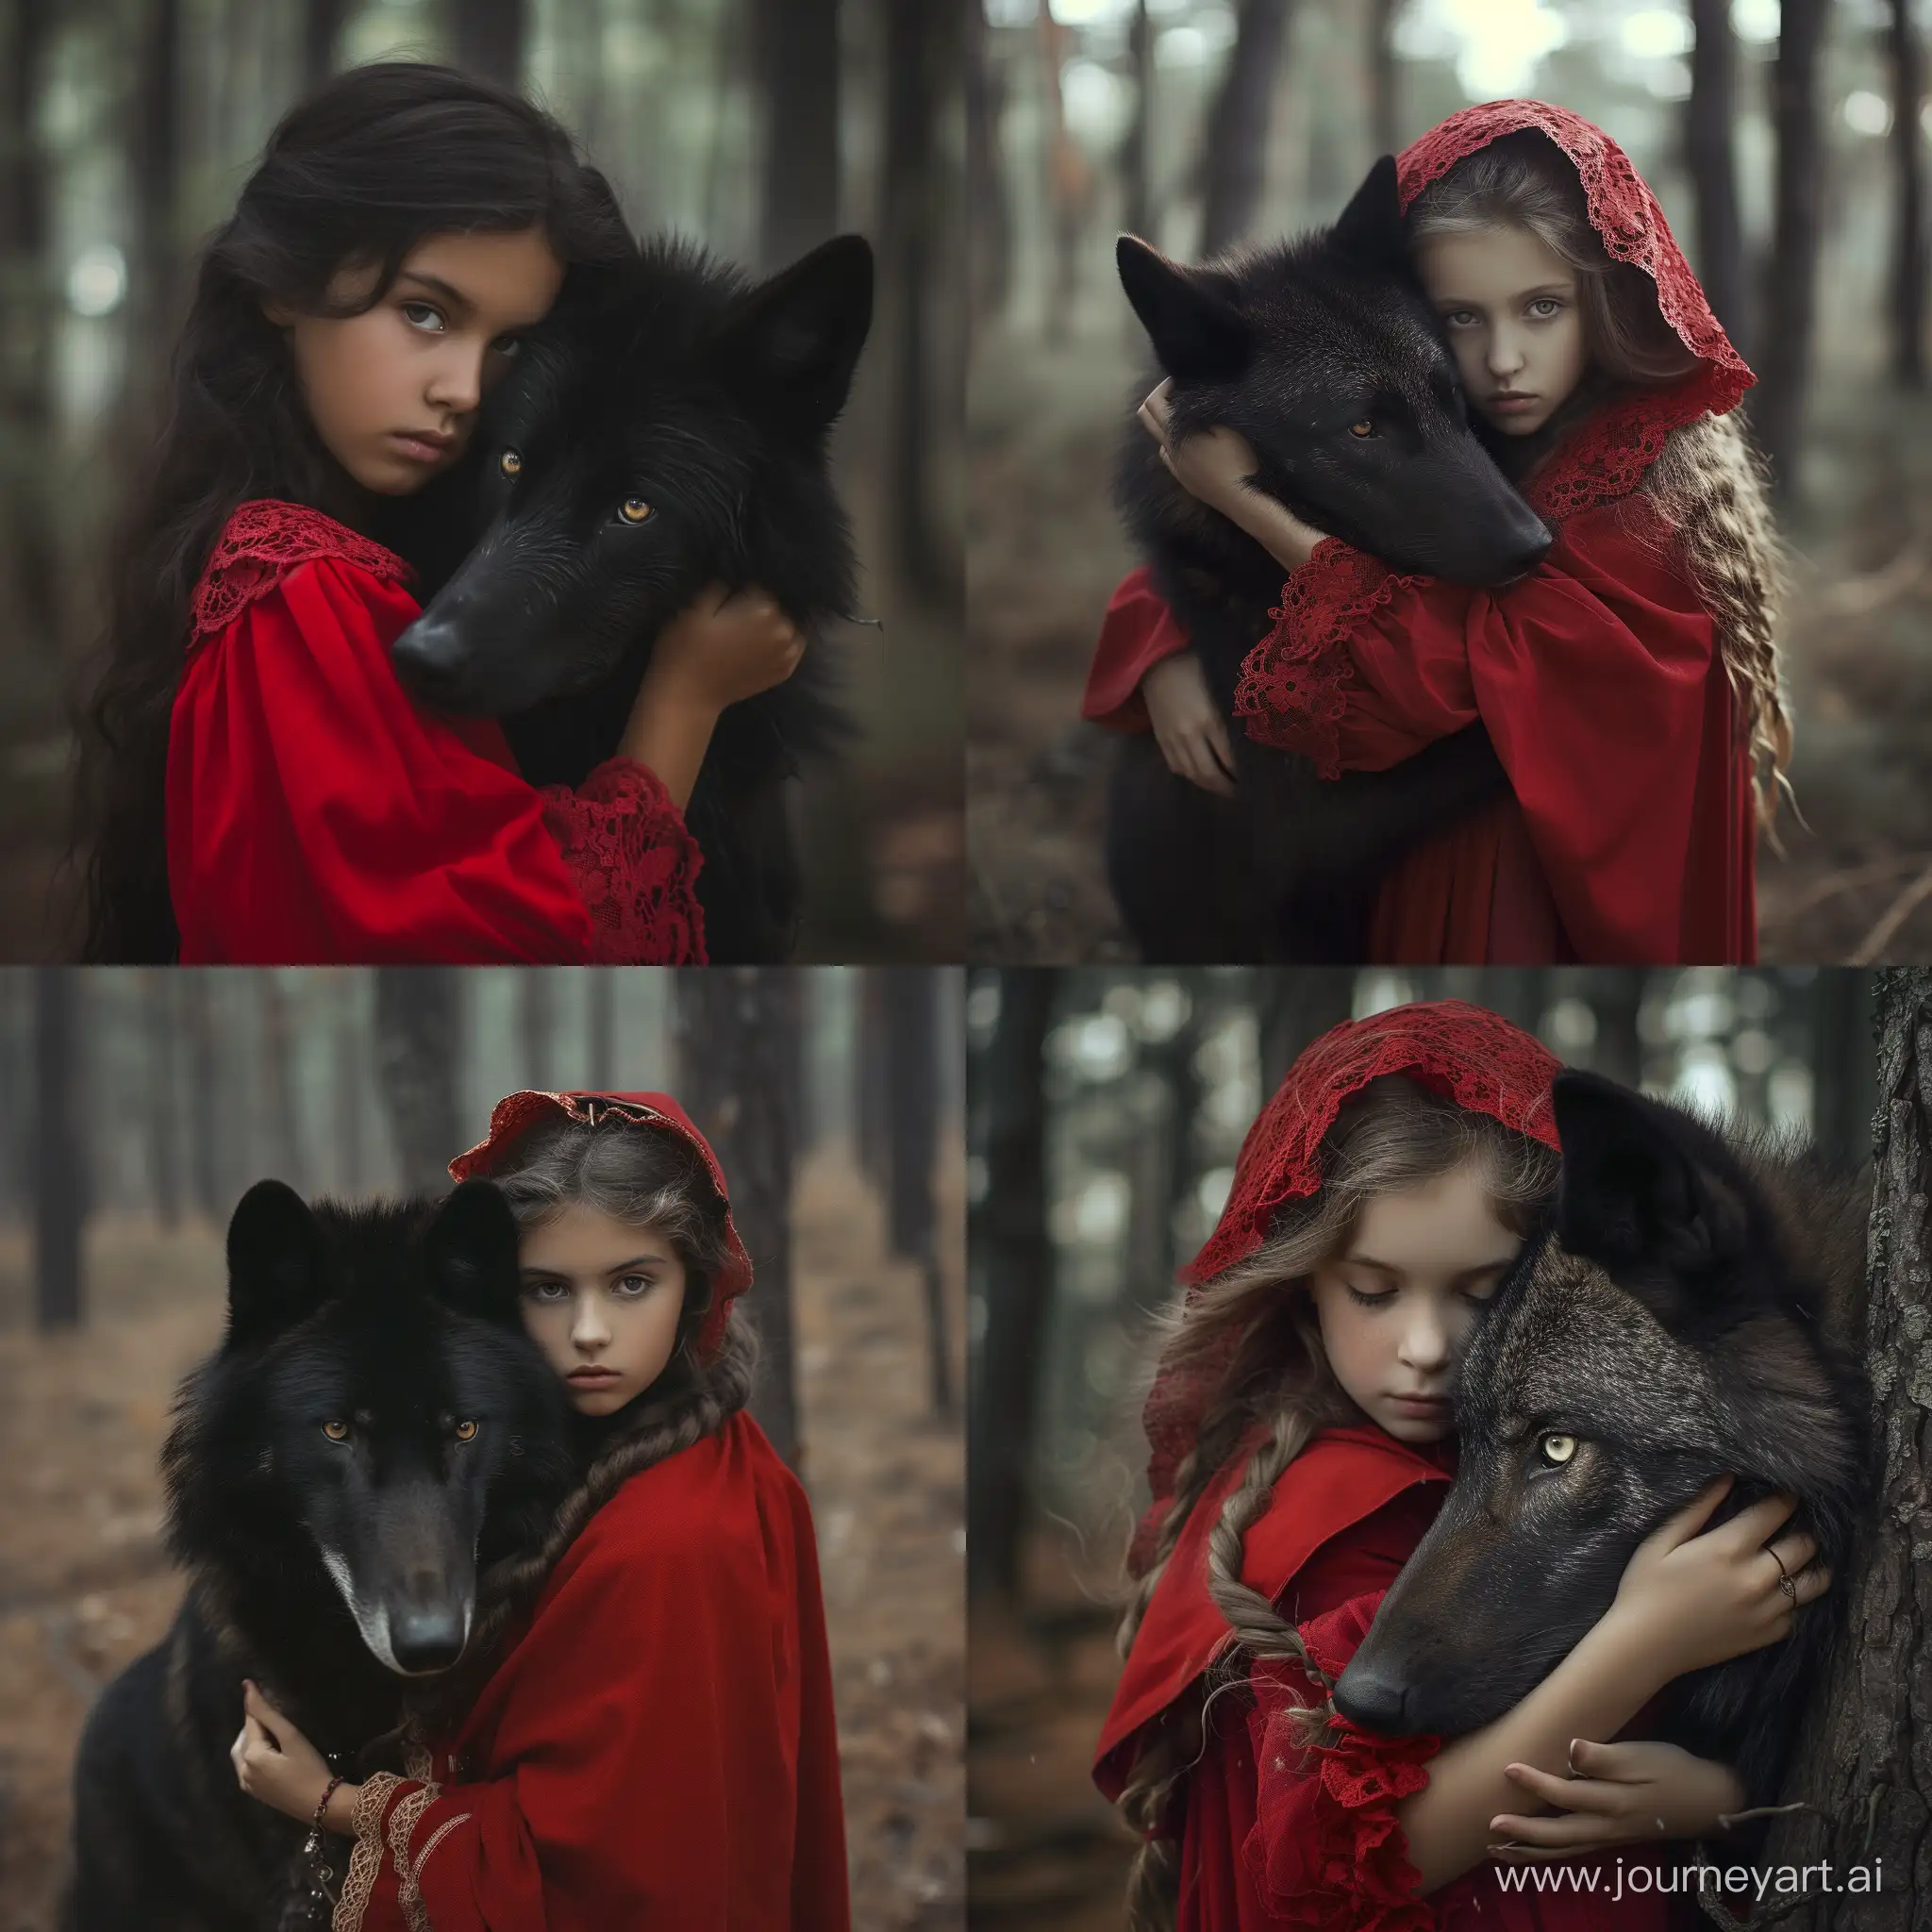 Little red riding hood, pretty young girl, holds the black wolf in her arms, forest, light passing through the trees, realistic portrait photography, high quality photograph, in the style of Luis Royo:: 2 —style raw